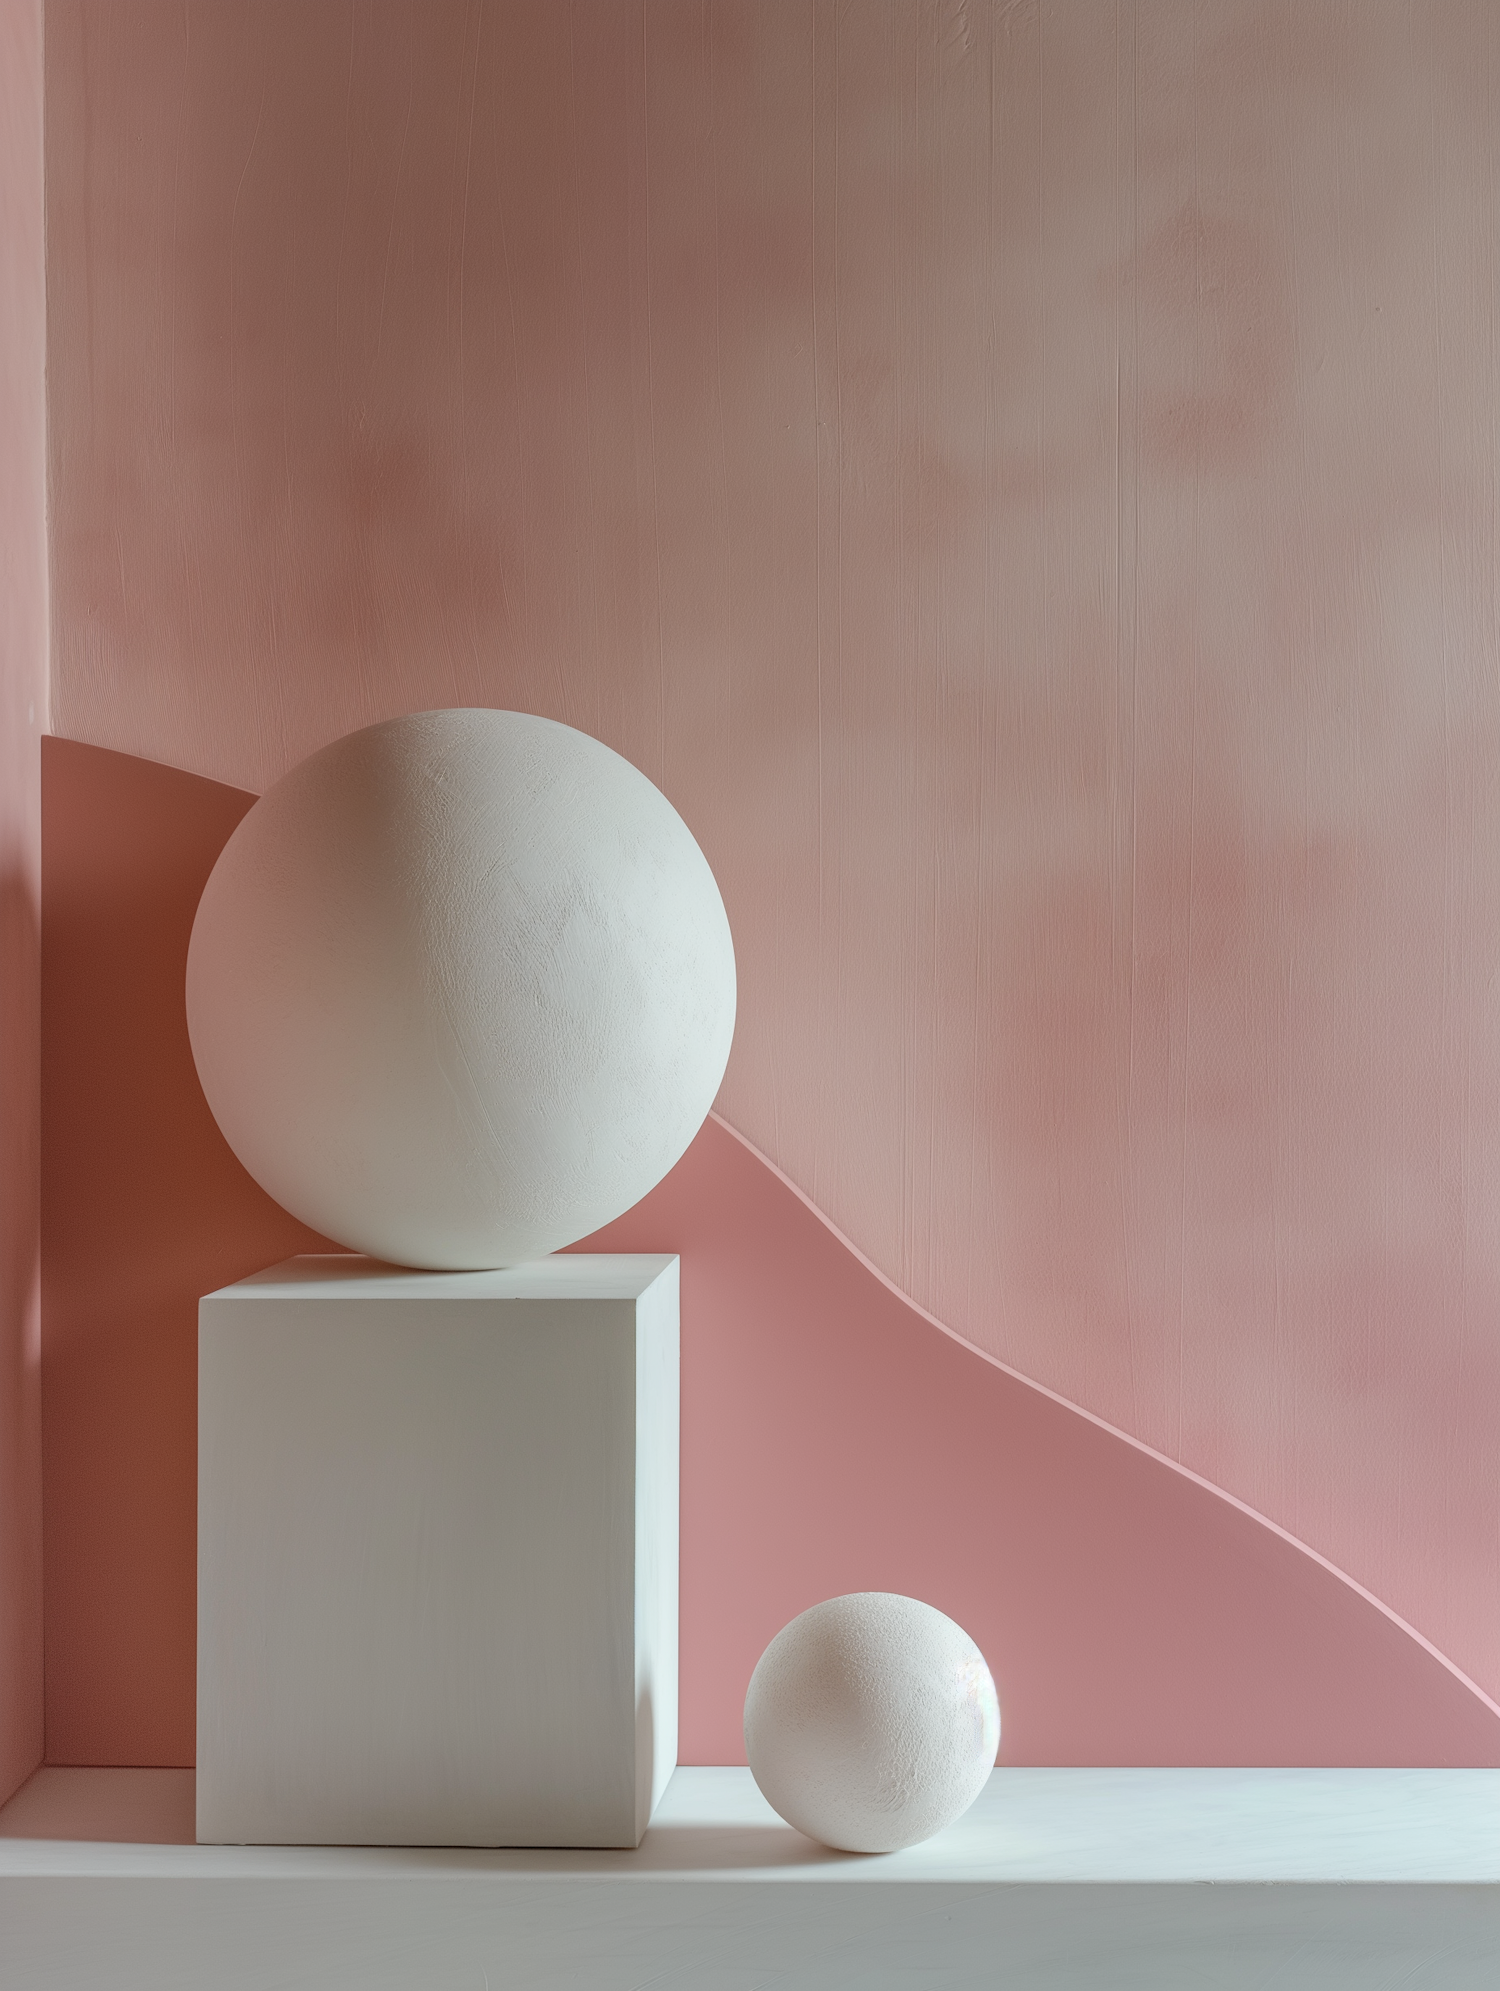 Minimalist Geometric Composition in Pink